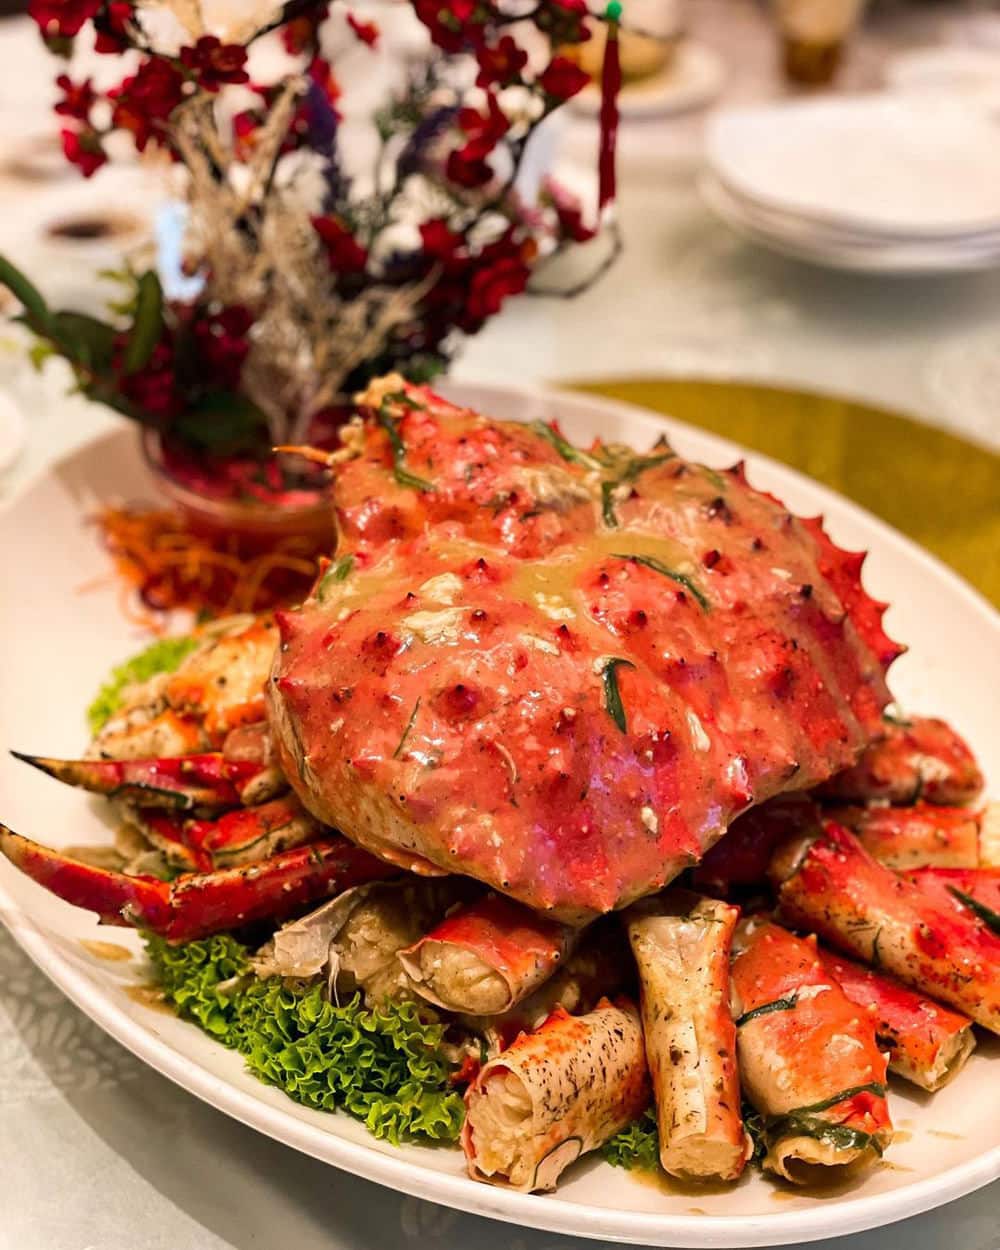 Delicious crab dishes at Long Beach Seafood Restaurant. Photo: Long Beach Seafood Restaurant / Facebook